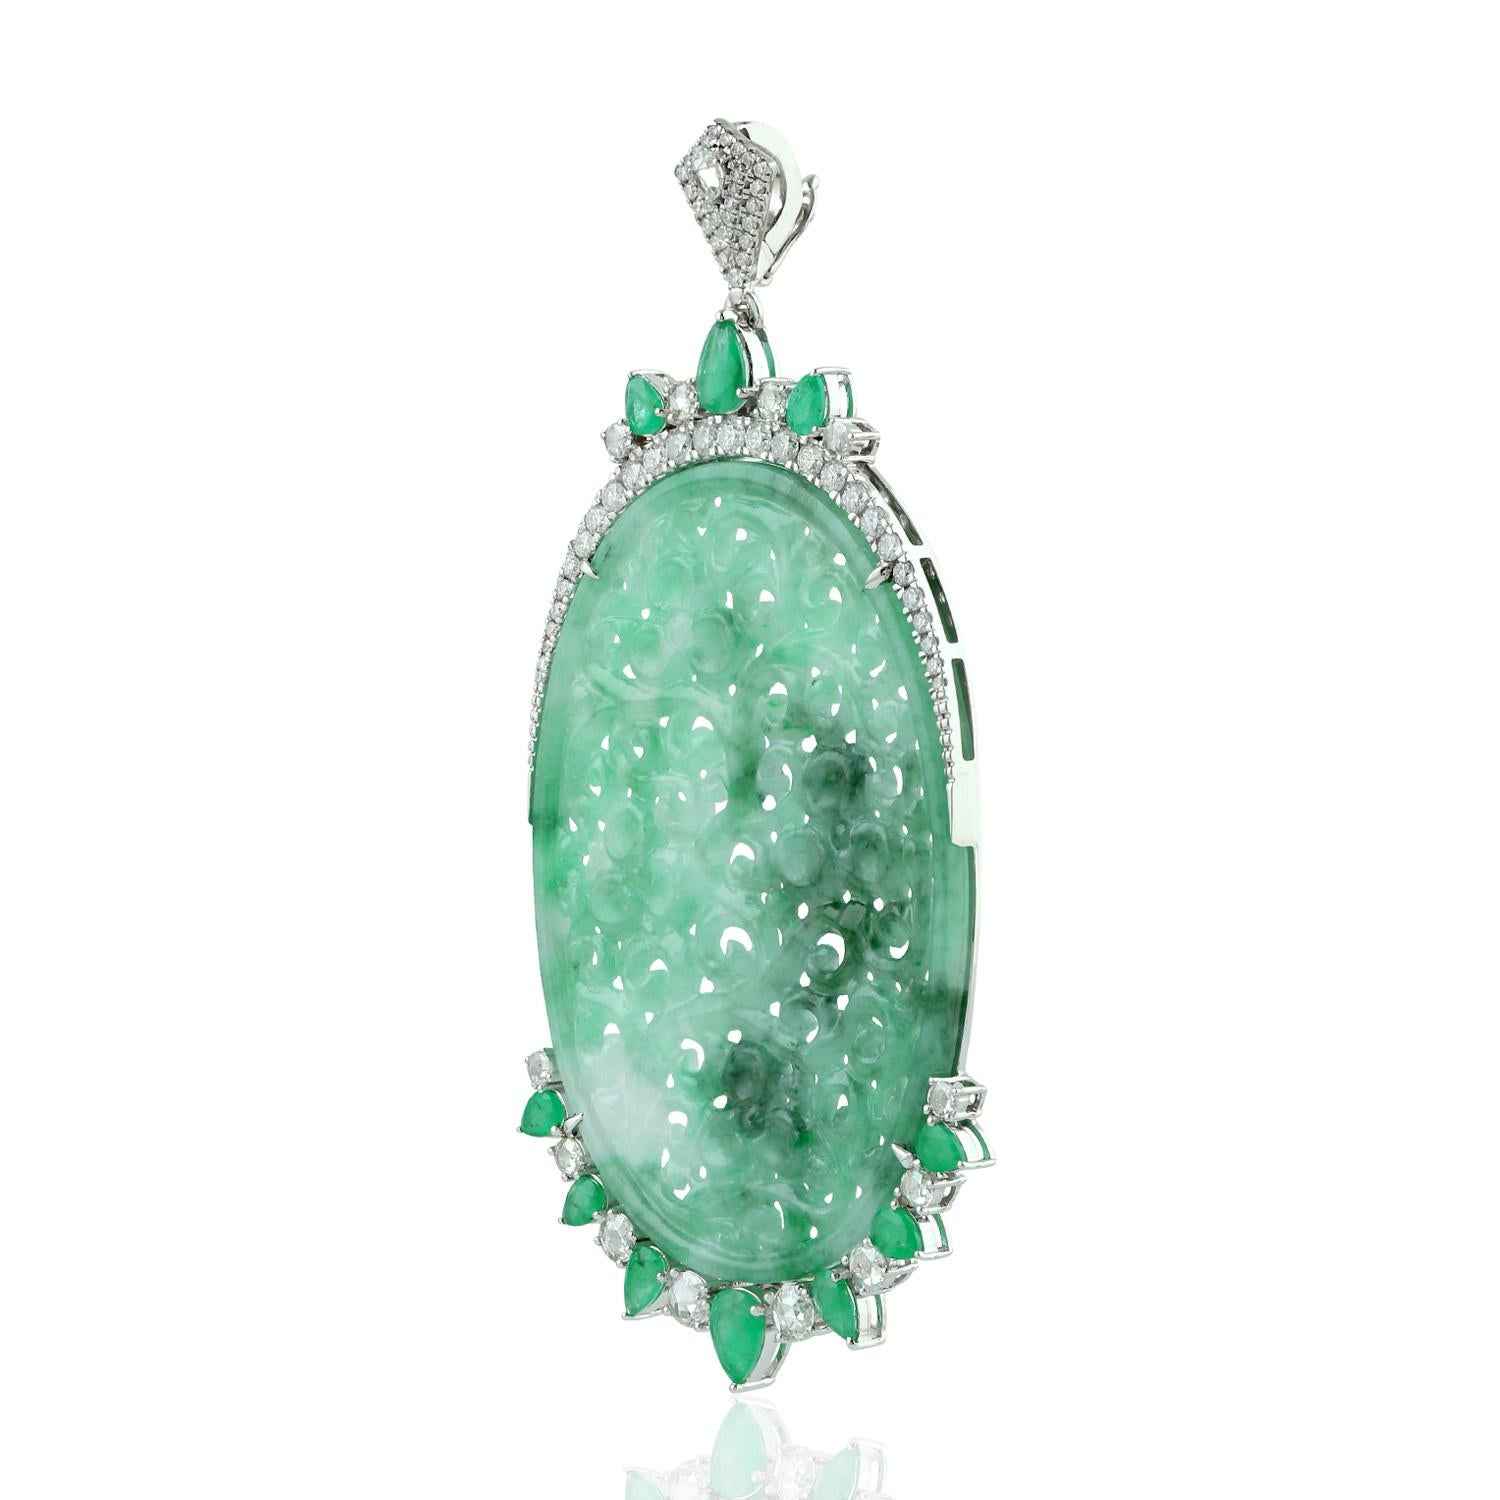 Cast in 18 Karat gold, this beautiful pendant features 35.47 carats of carved Jade, 1.92 carats emerald & 1.47 carats of sparkling diamonds.  

FOLLOW  MEGHNA JEWELS storefront to view the latest collection & exclusive pieces.  Meghna Jewels is